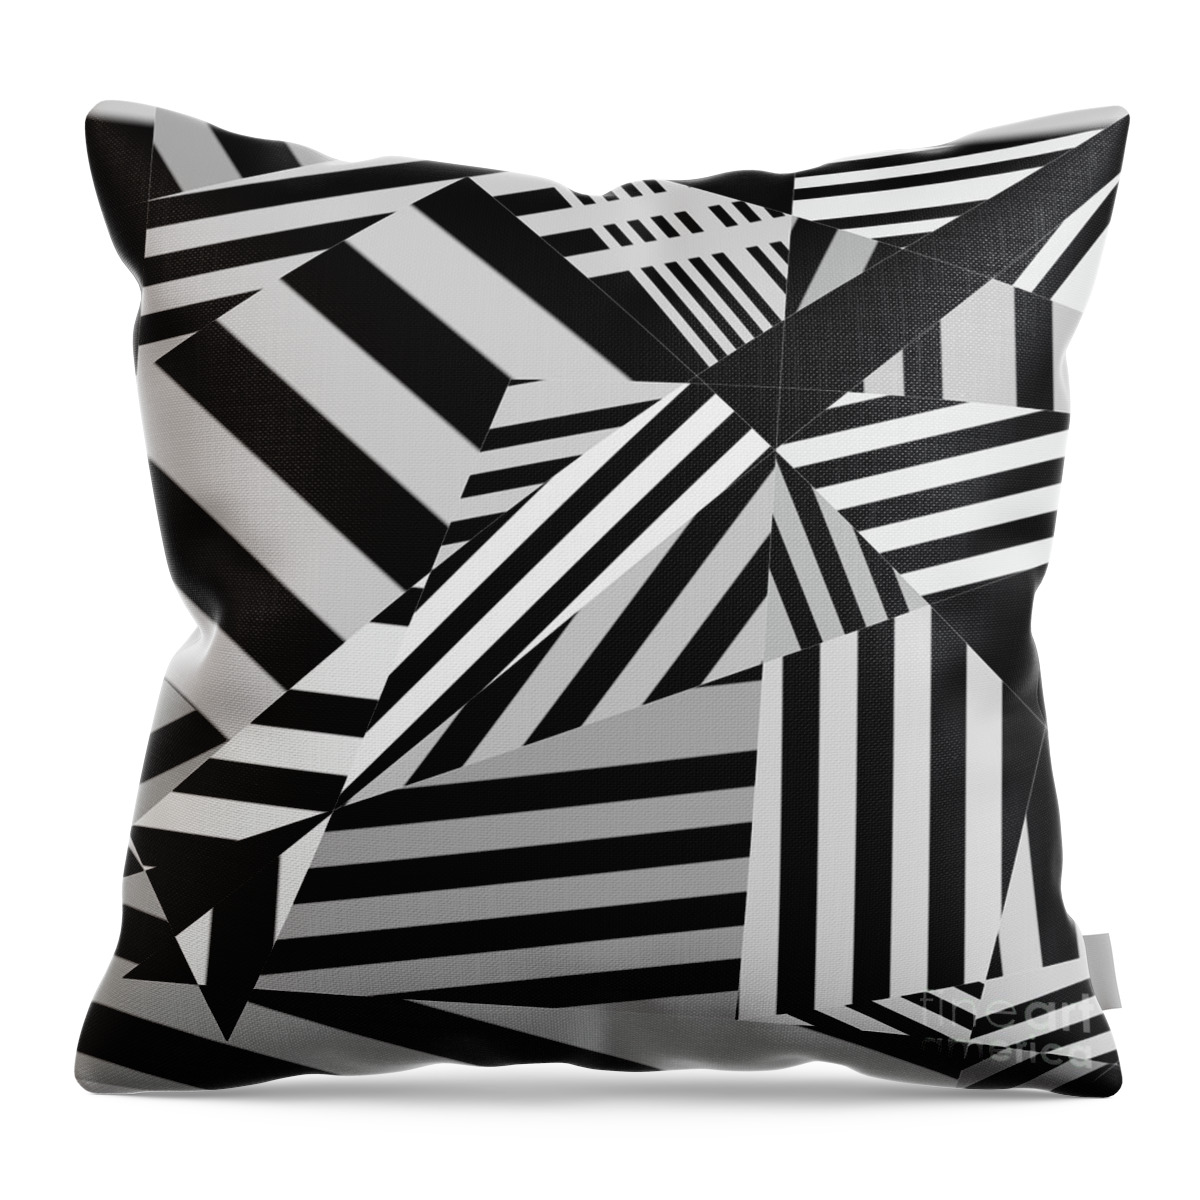 Abstract Throw Pillow featuring the digital art Untitled, 2019 by Alex Caminker